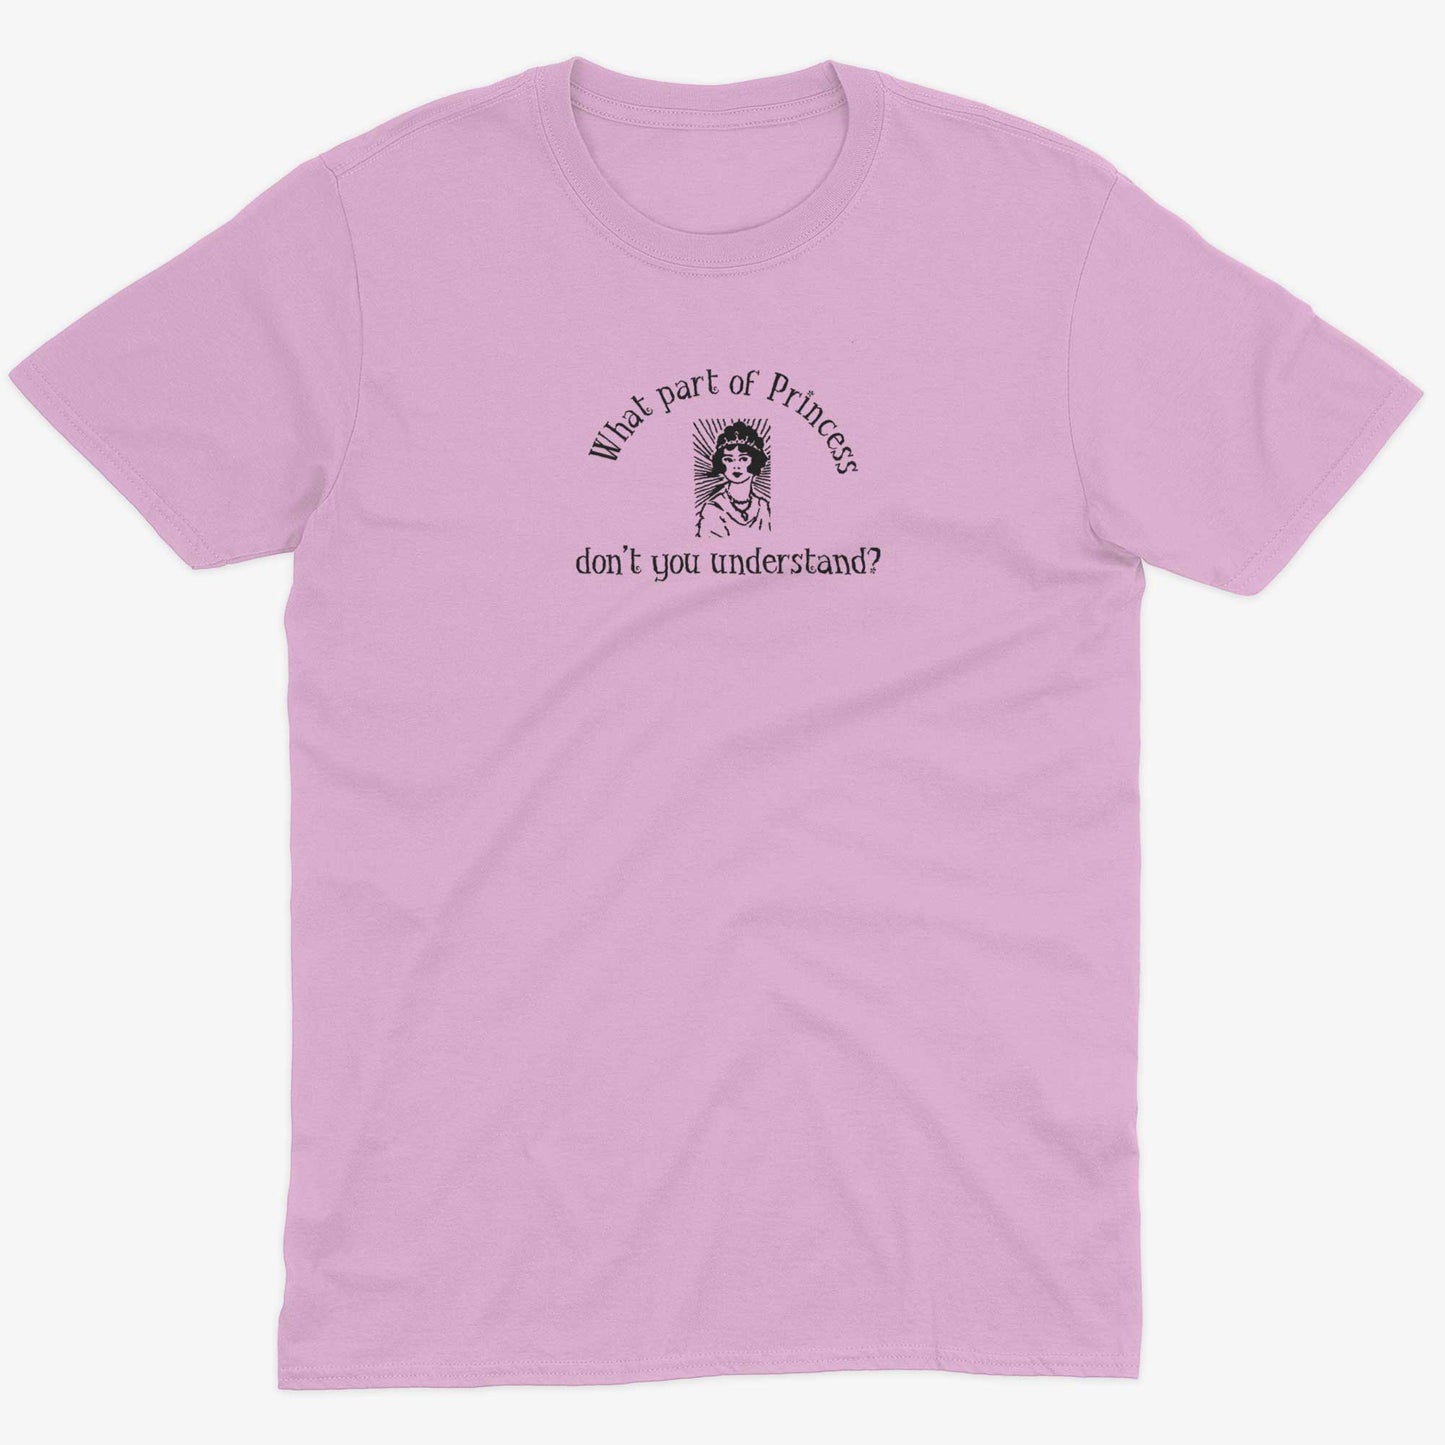 What Part Of Princess Don't You Understand? Unisex Or Women's Cotton T-shirt-Pink-Unisex